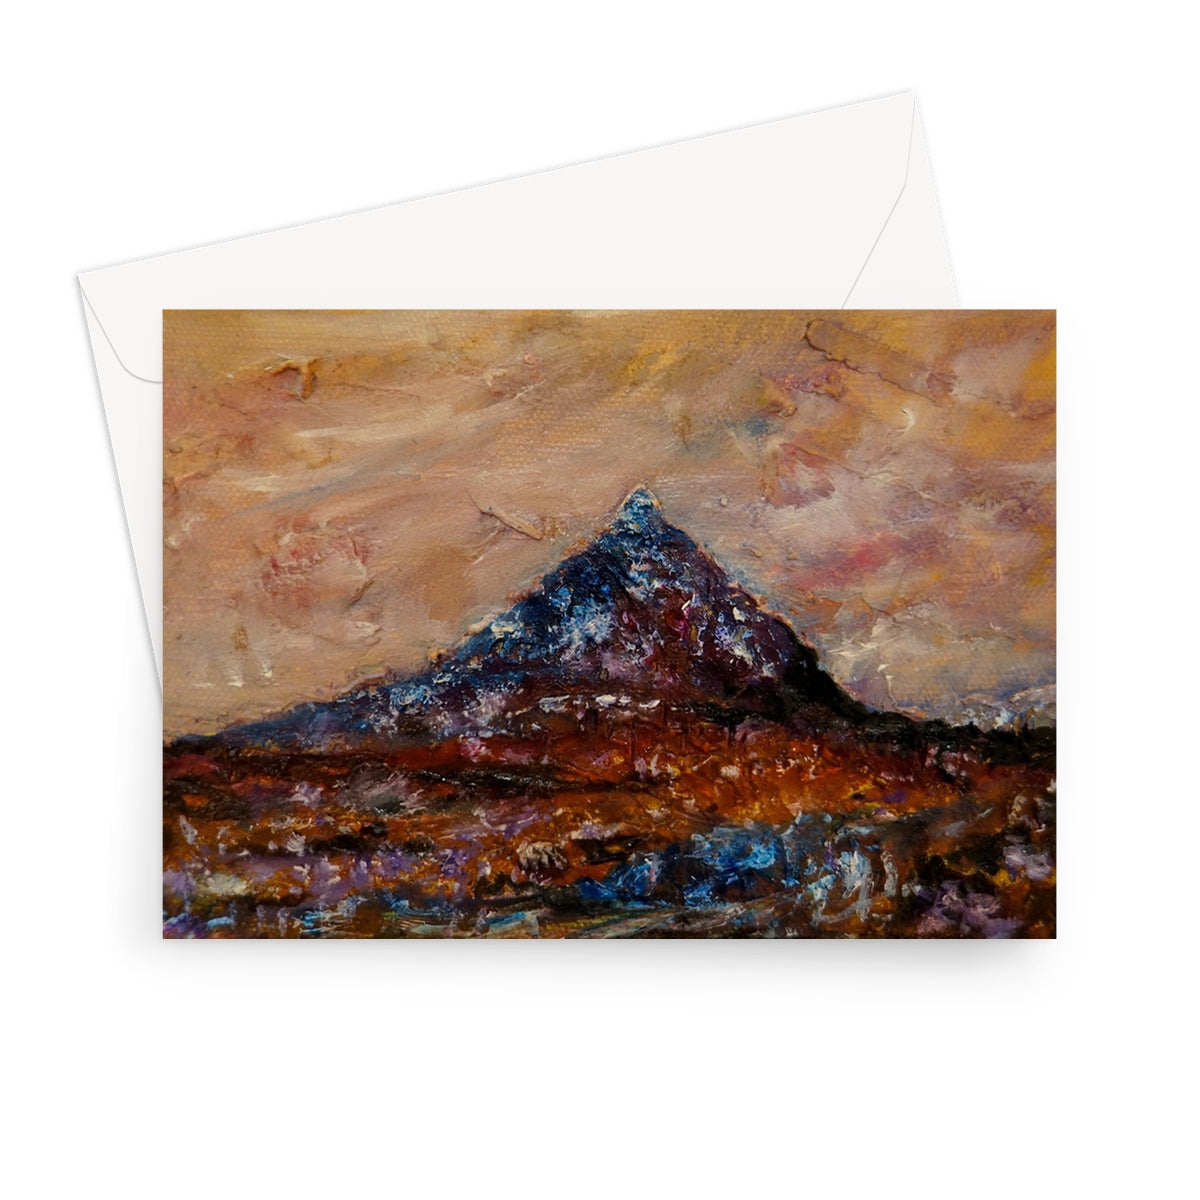 Buachaille Etive Mòr Art Gifts Greeting Card-Greetings Cards-Glencoe Art Gallery-7"x5"-10 Cards-Paintings, Prints, Homeware, Art Gifts From Scotland By Scottish Artist Kevin Hunter